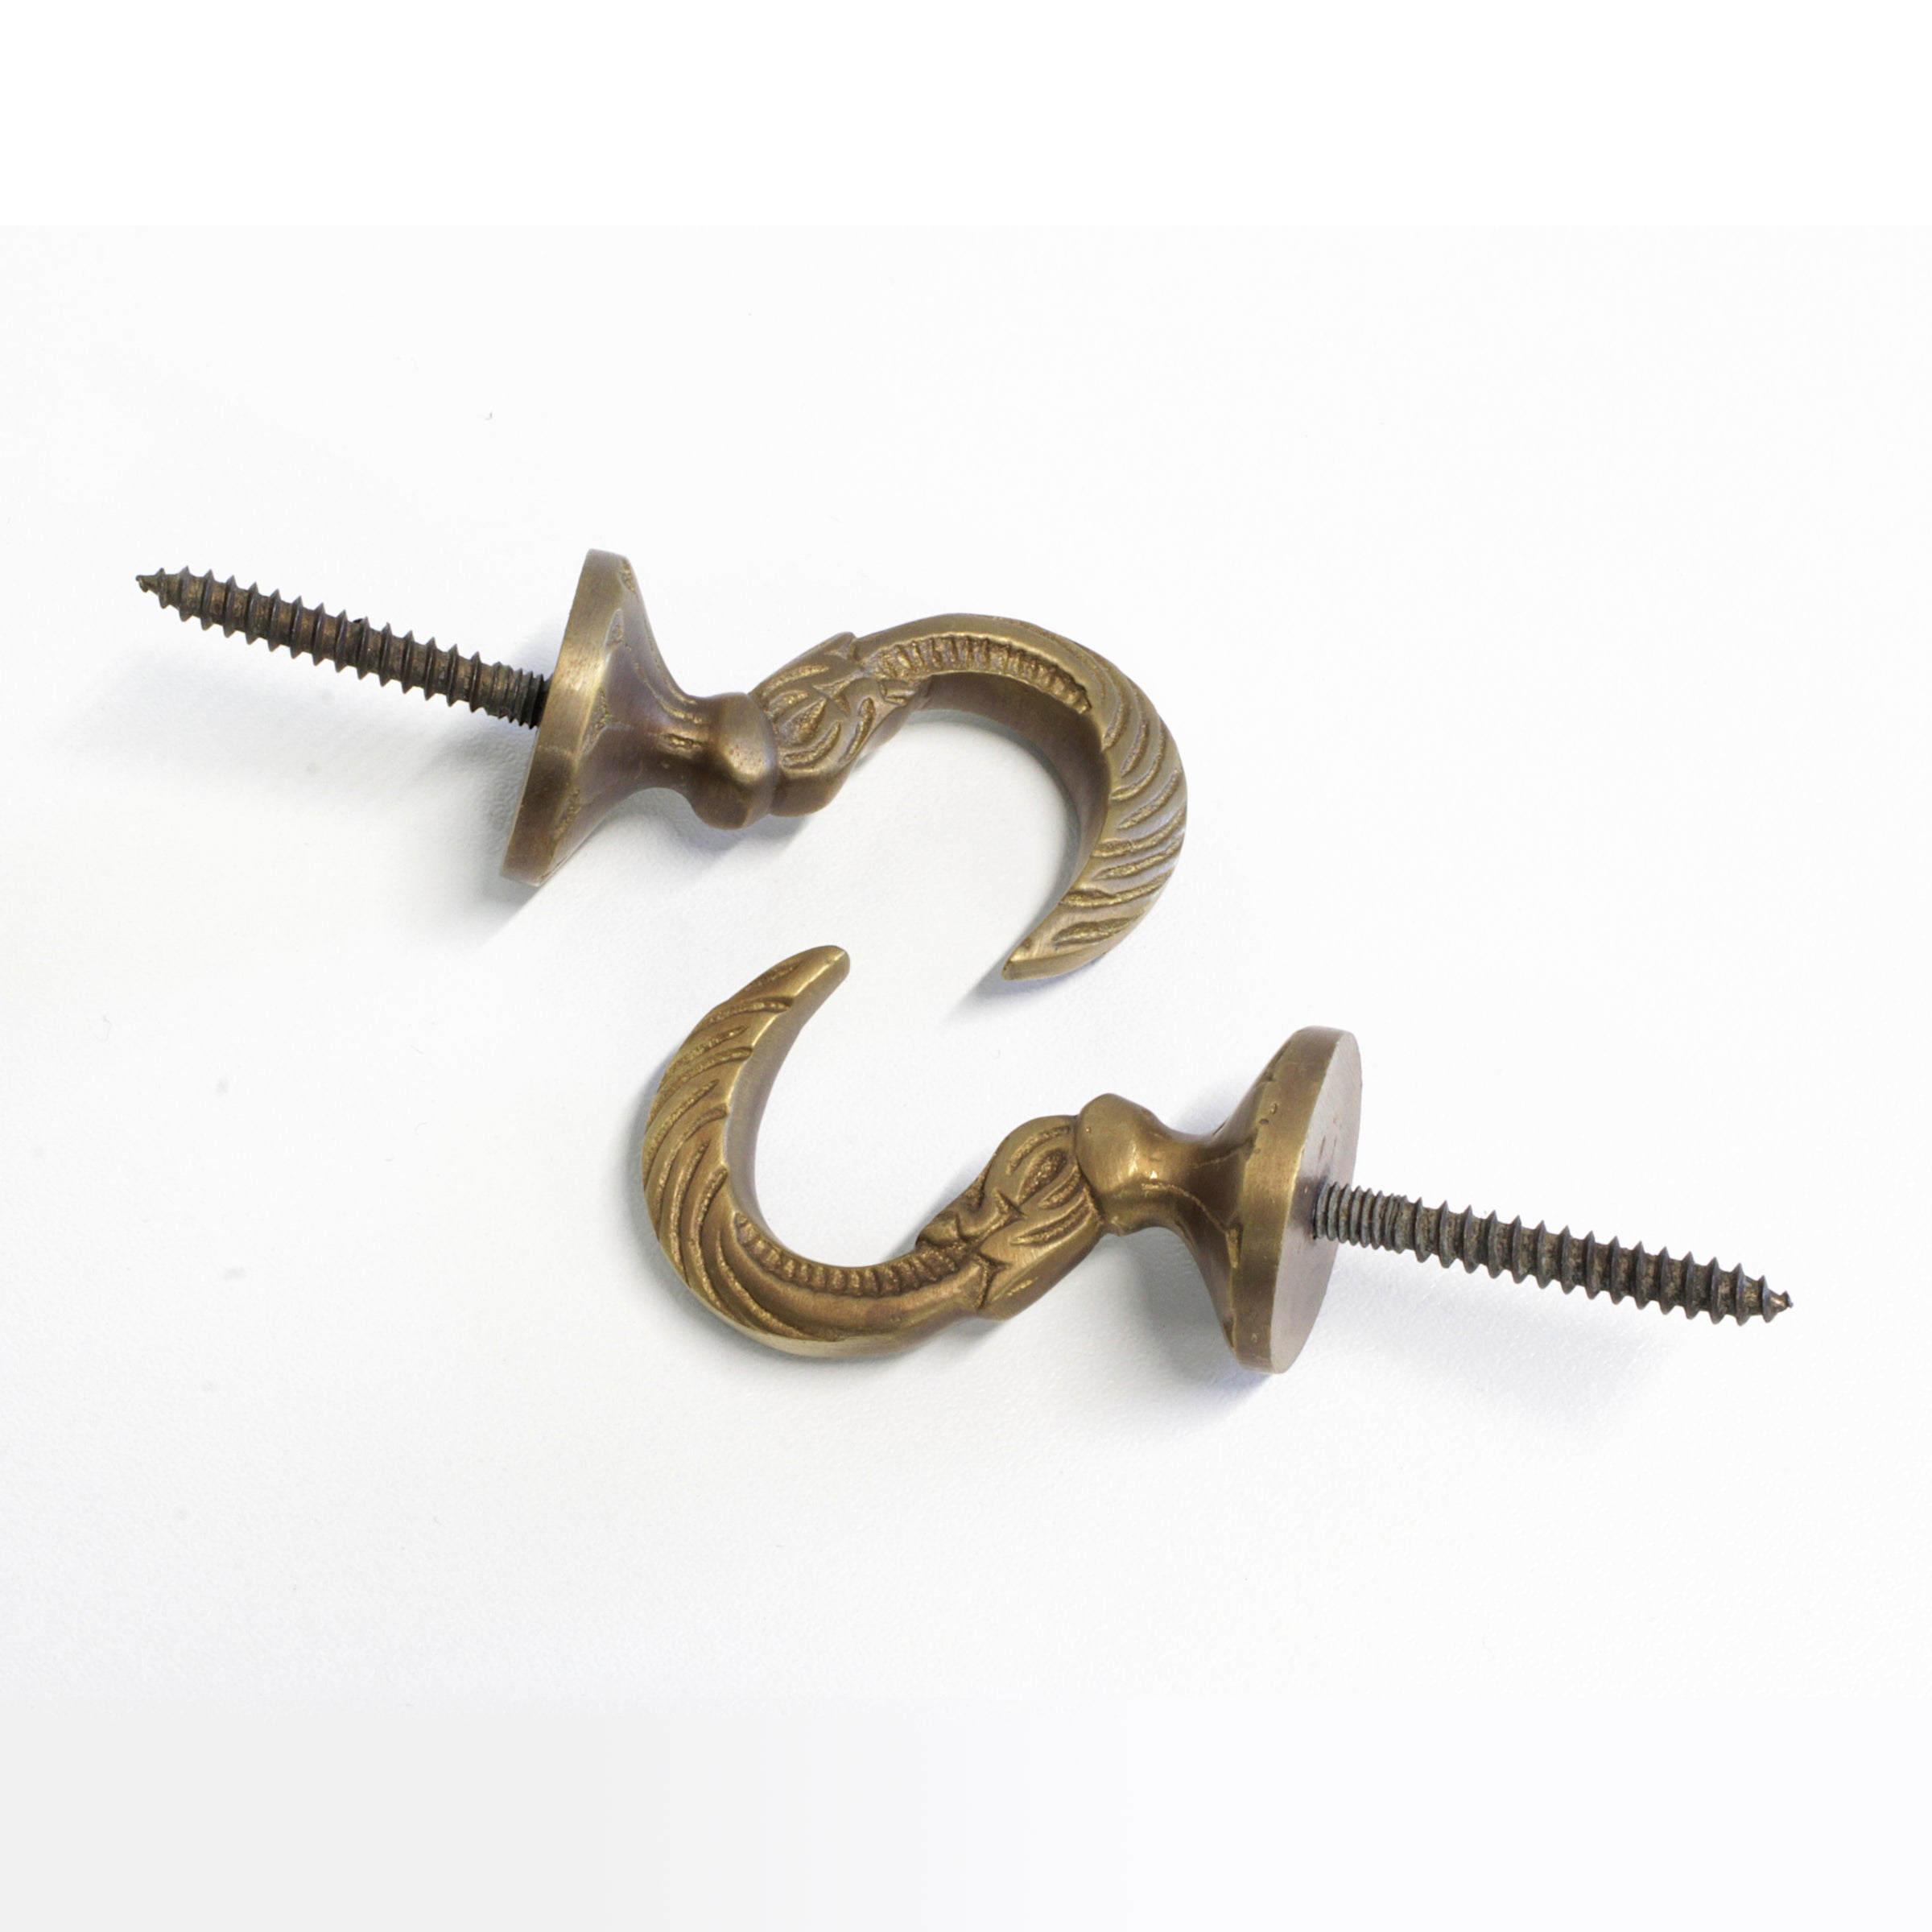 Sold at Auction: Vintage Brass Wall Hooks